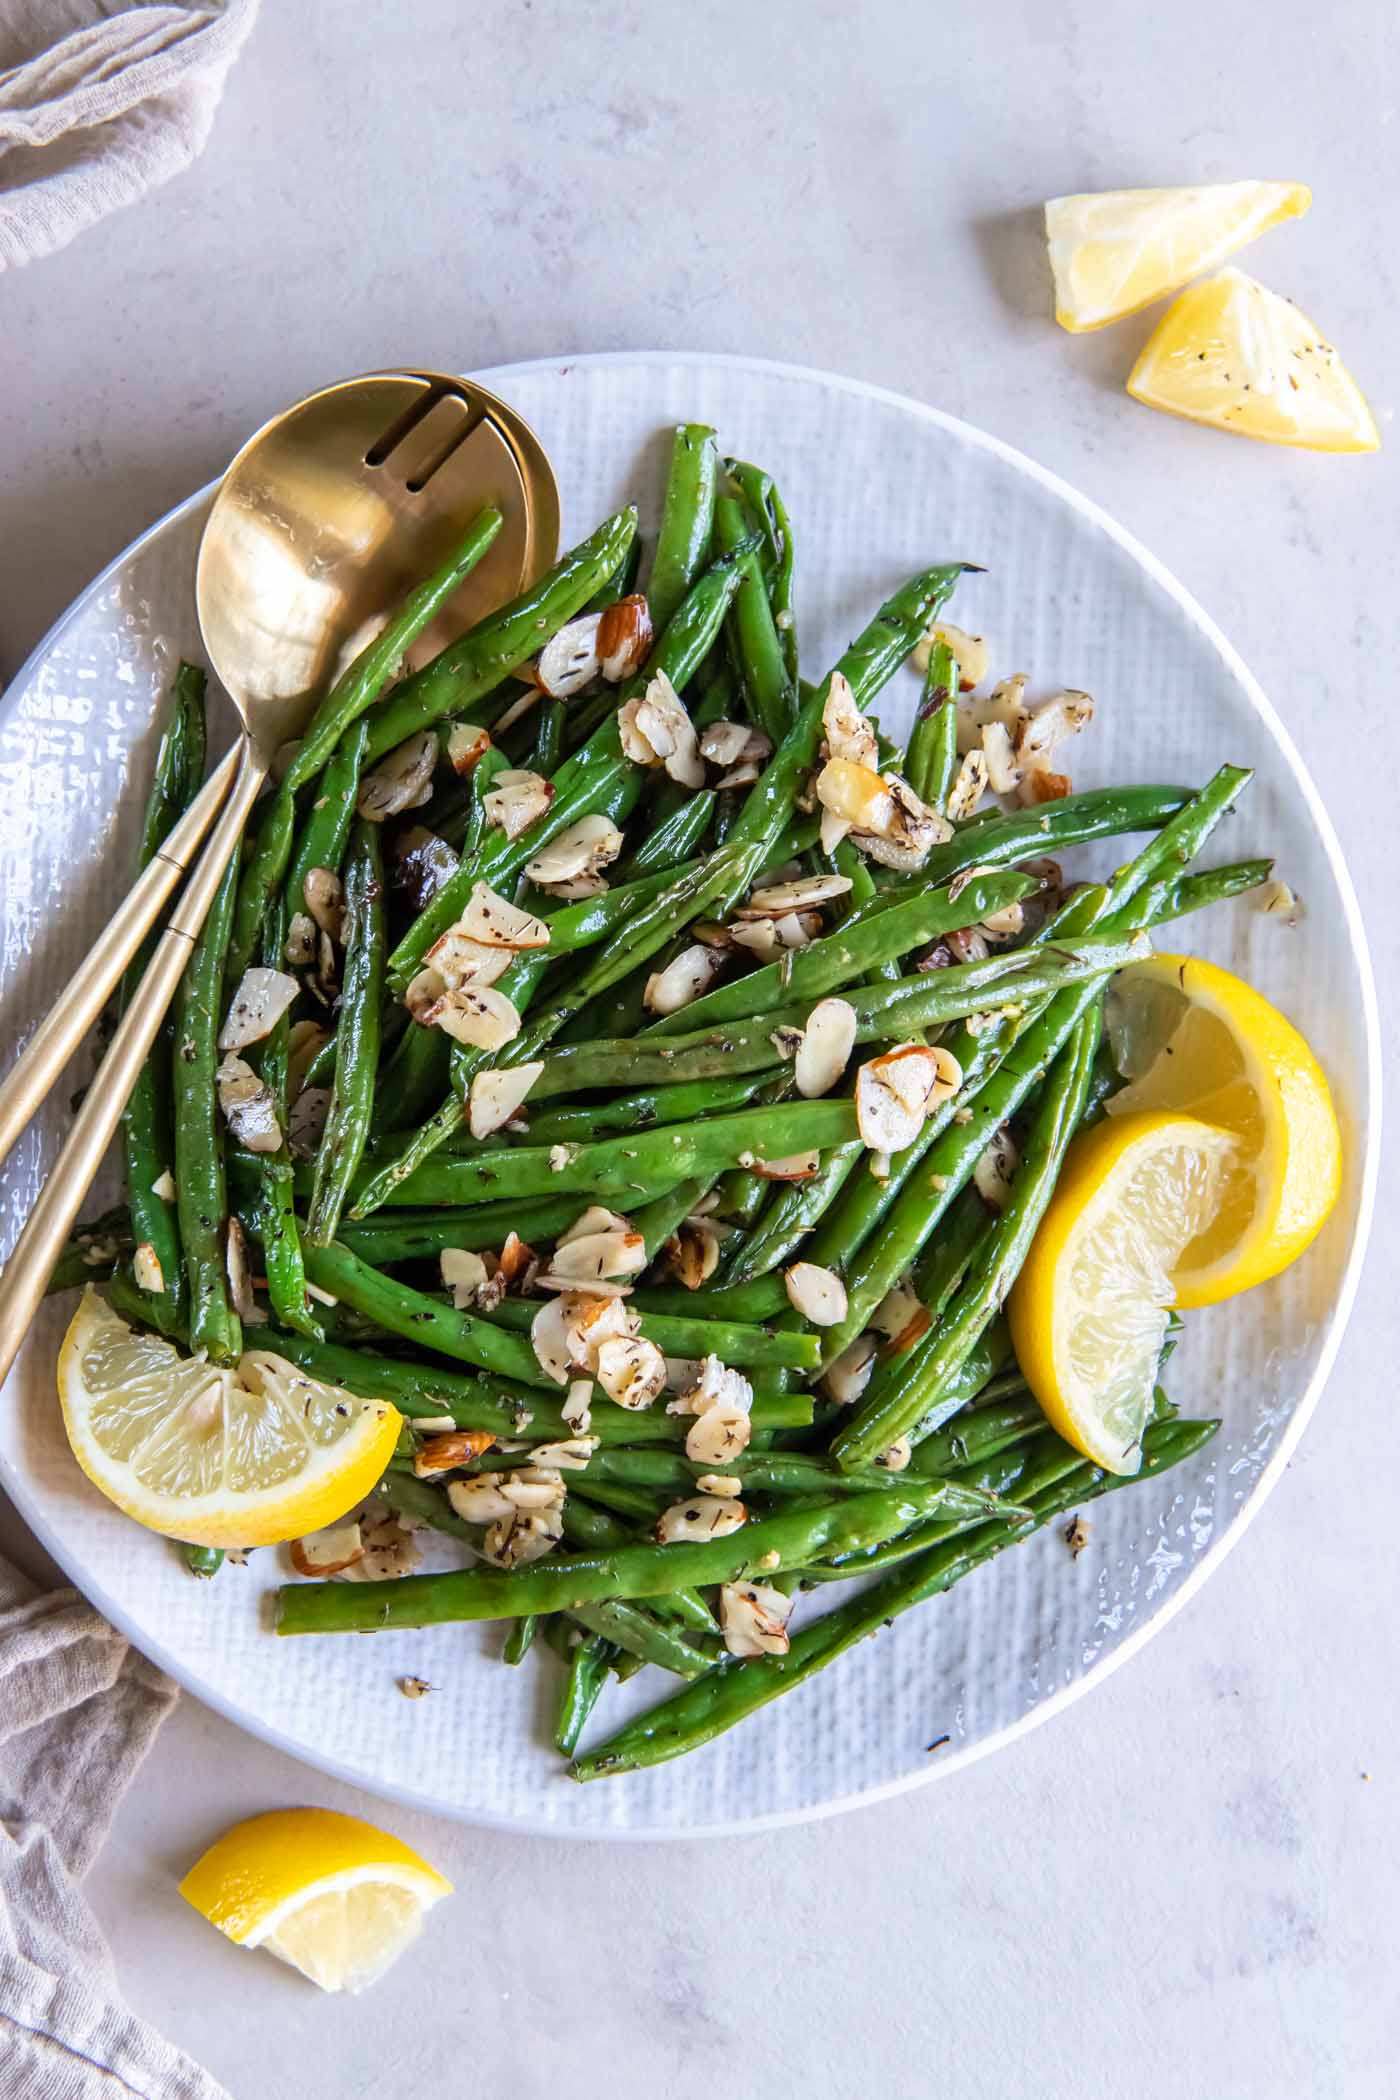 Roasted green beans in a serving bowl garnished with lemon wedges, with gold serving spoons.